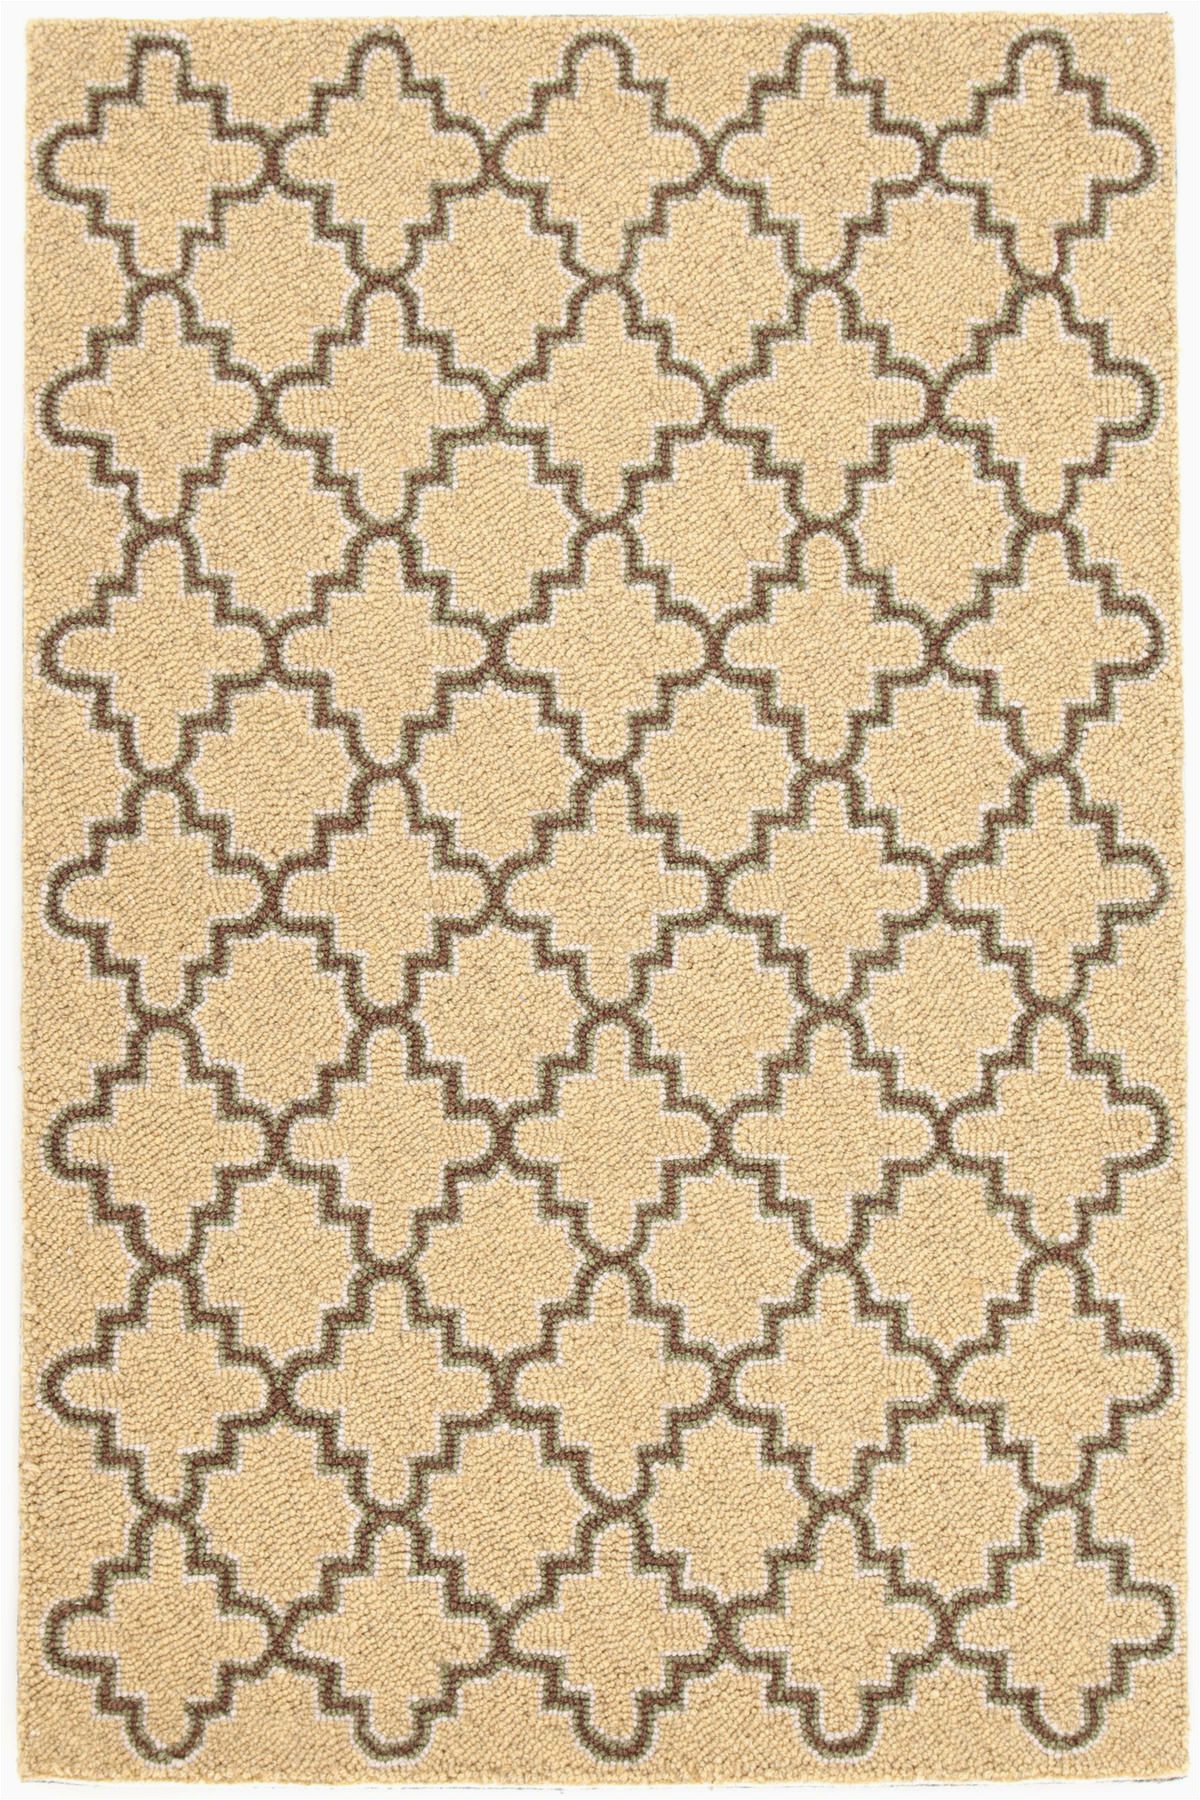 Crate and Barrel Outlet area Rugs Plain Tin Wheat Wool Micro Hooked Rug Dash & Albert